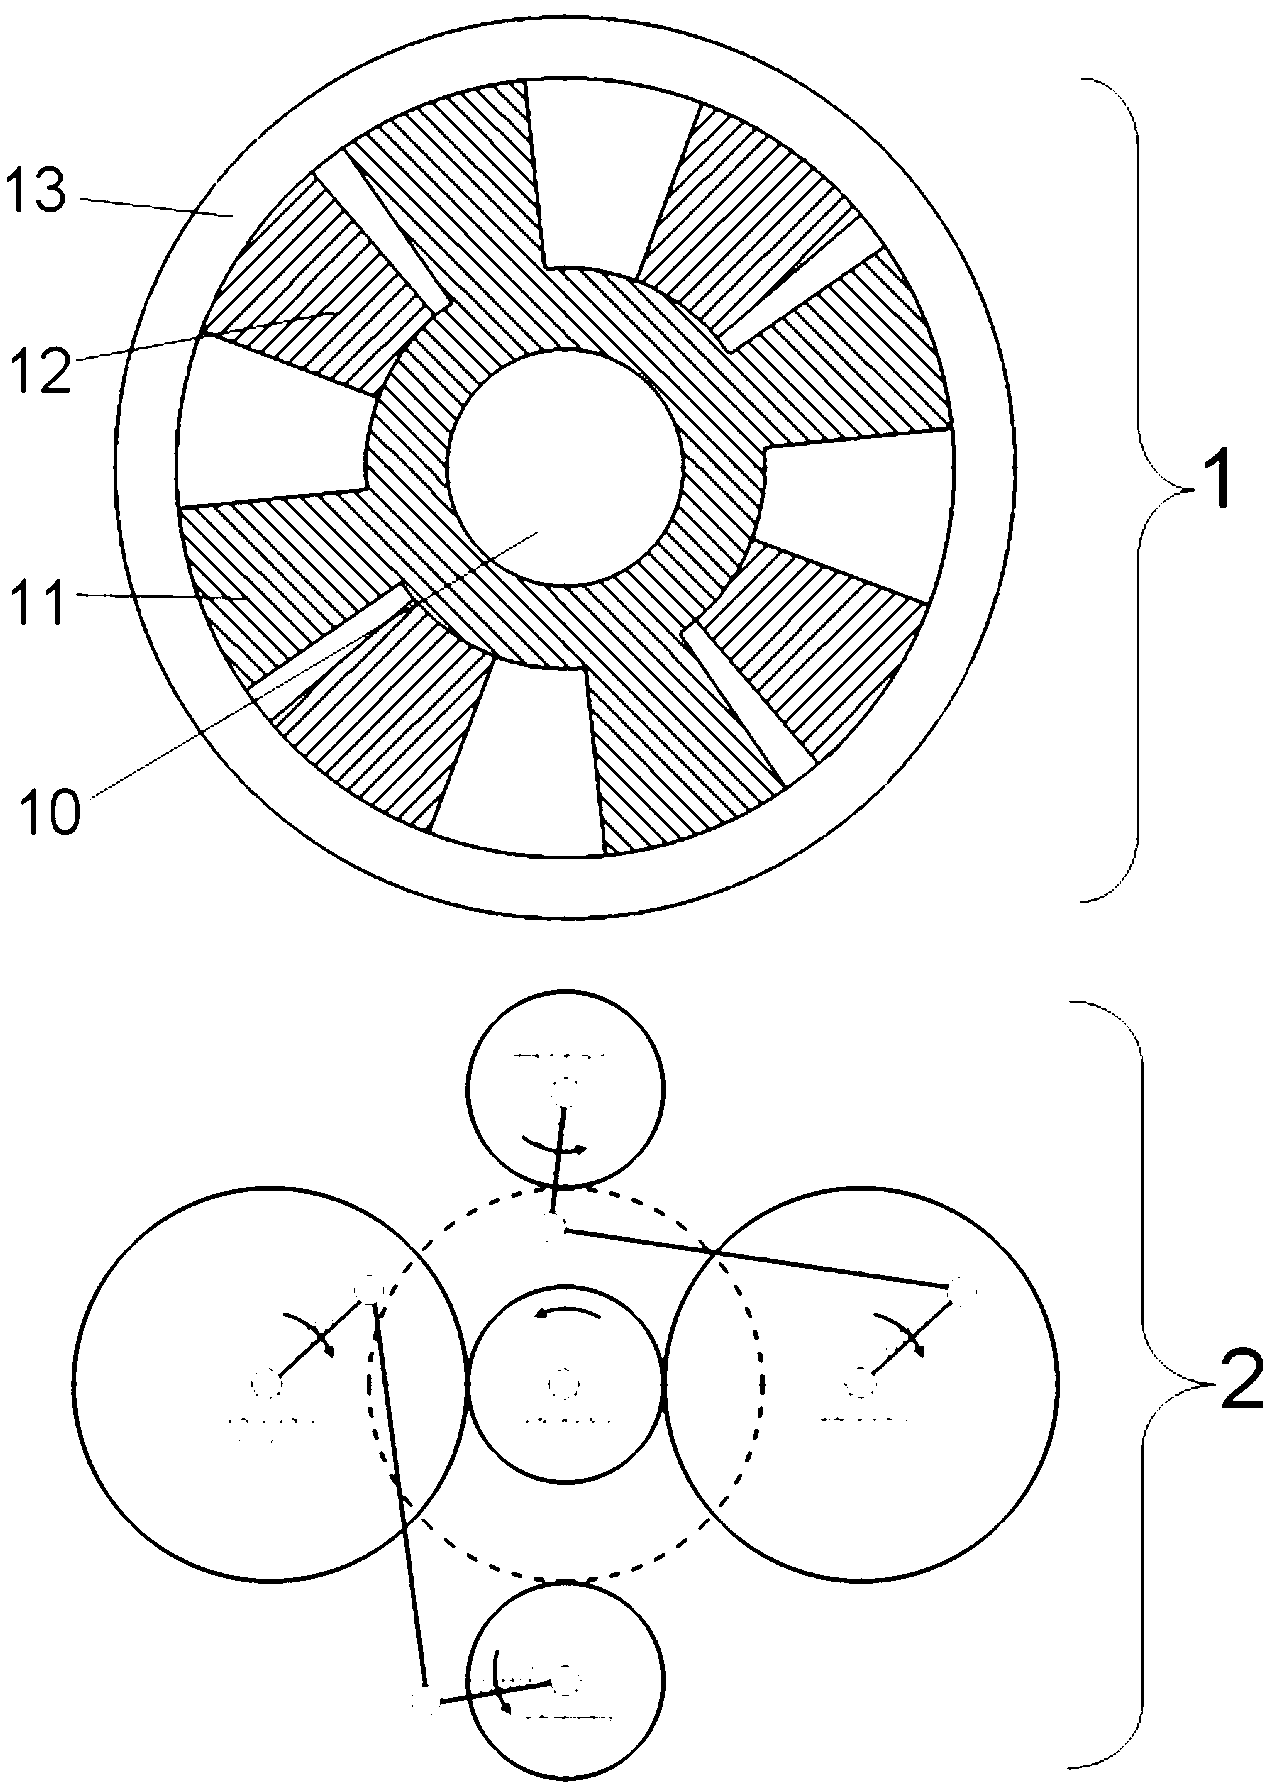 Ordinary gear train and non-uniform transmission mechanism combined power transmission device